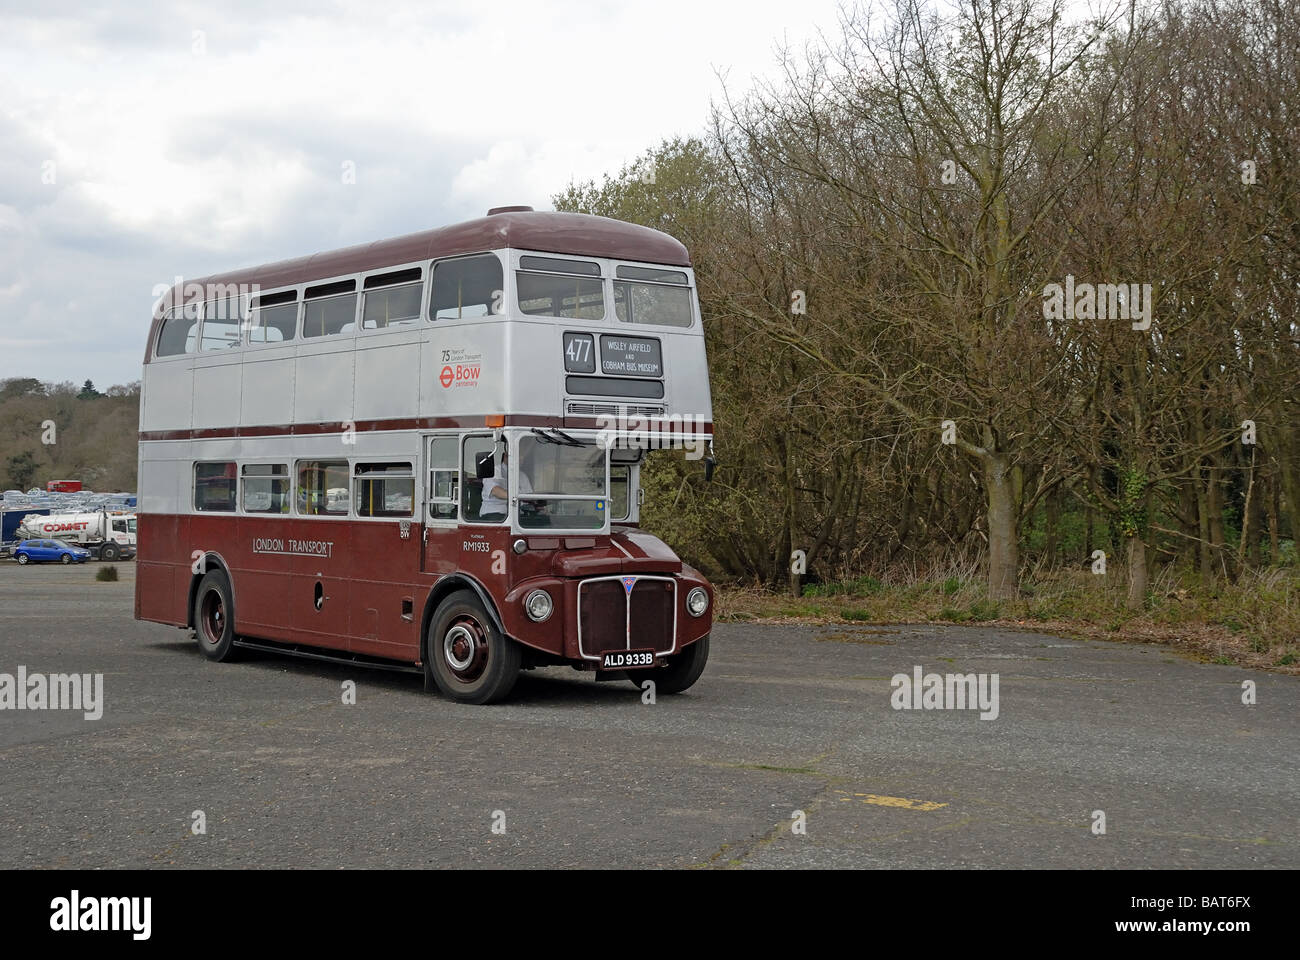 Three quarters front view of ALD 933B a 1964 AEC Routemaster RM 1933 part of the East London Heritage Route Fleet being used as Stock Photo